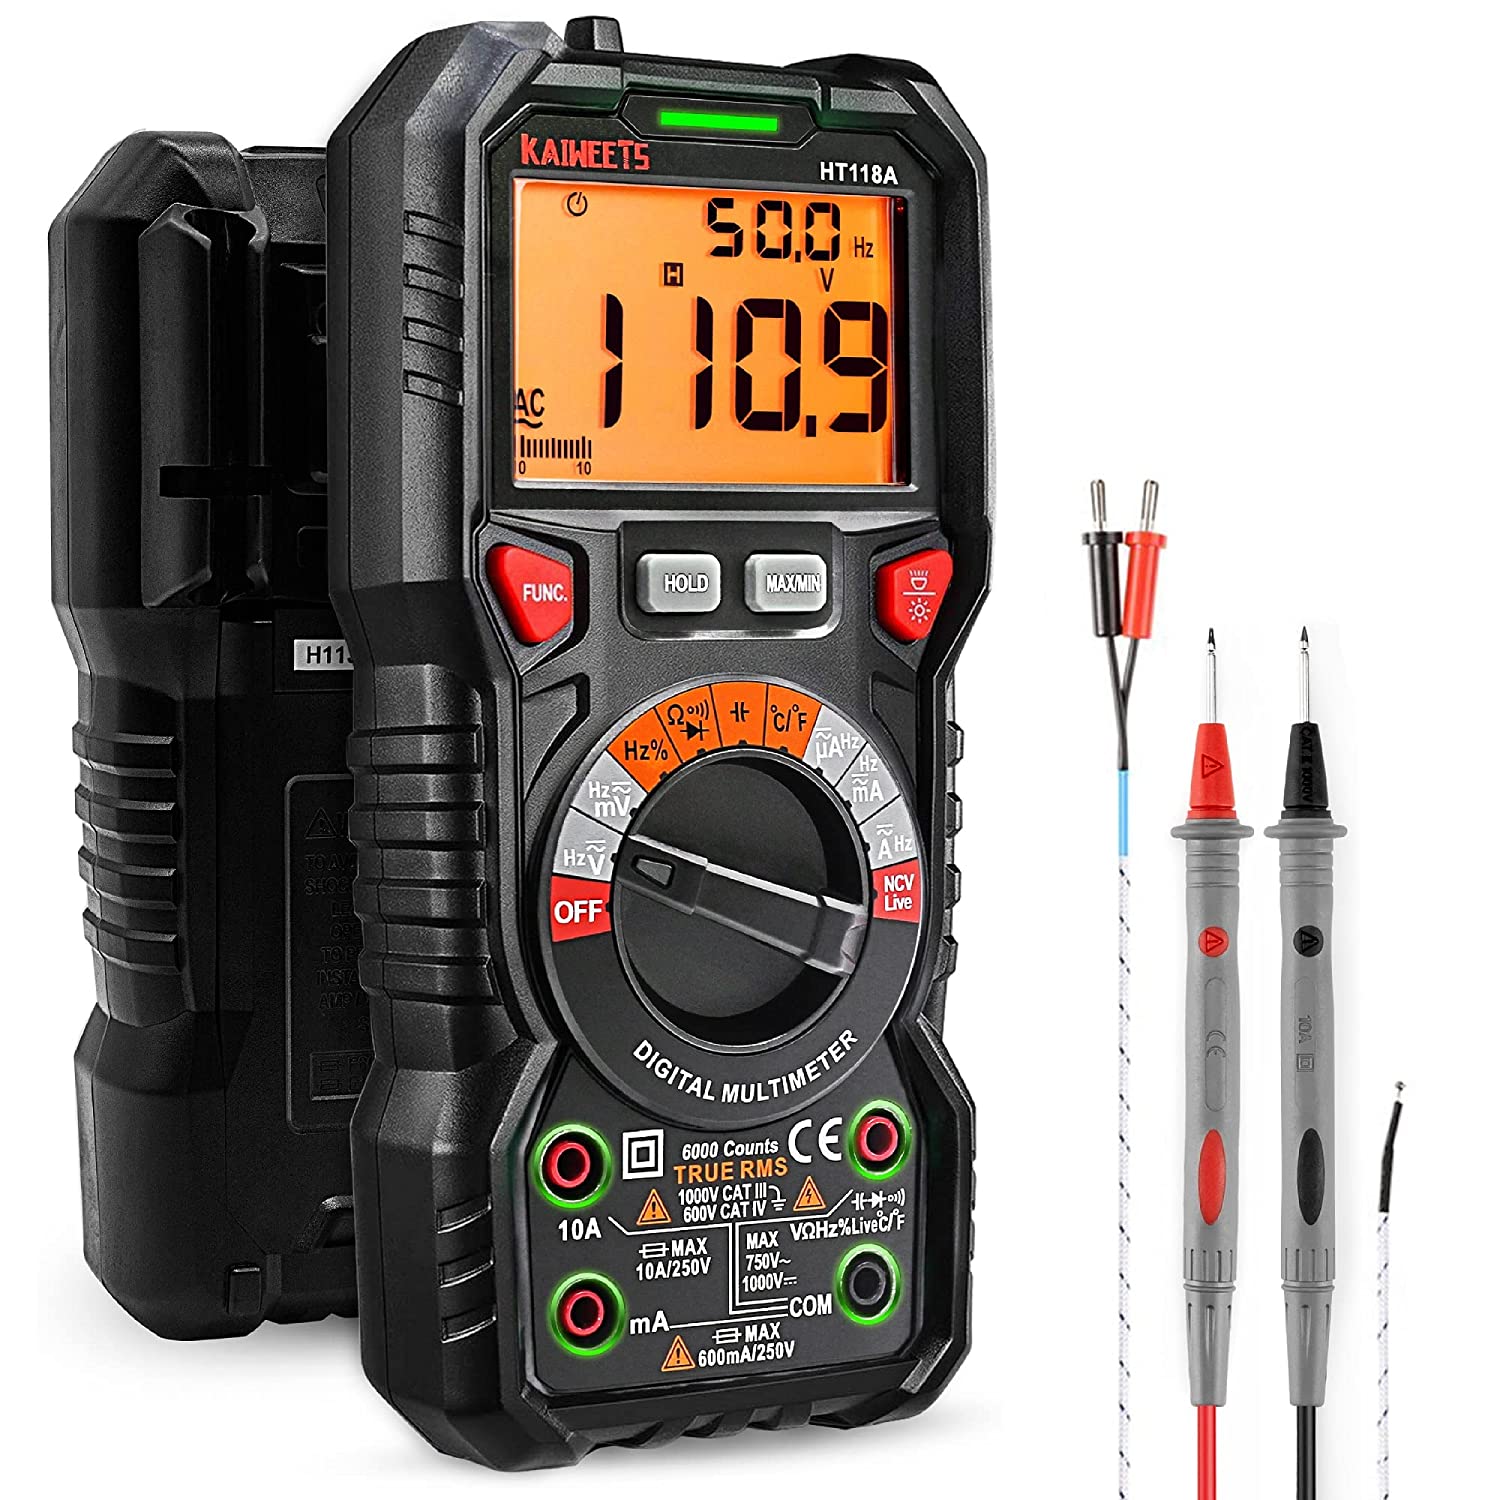 Kaiweets HT118A Auto-ranging Digital Multimeter $14 (Free shipping with Prime) after coupon and promo code